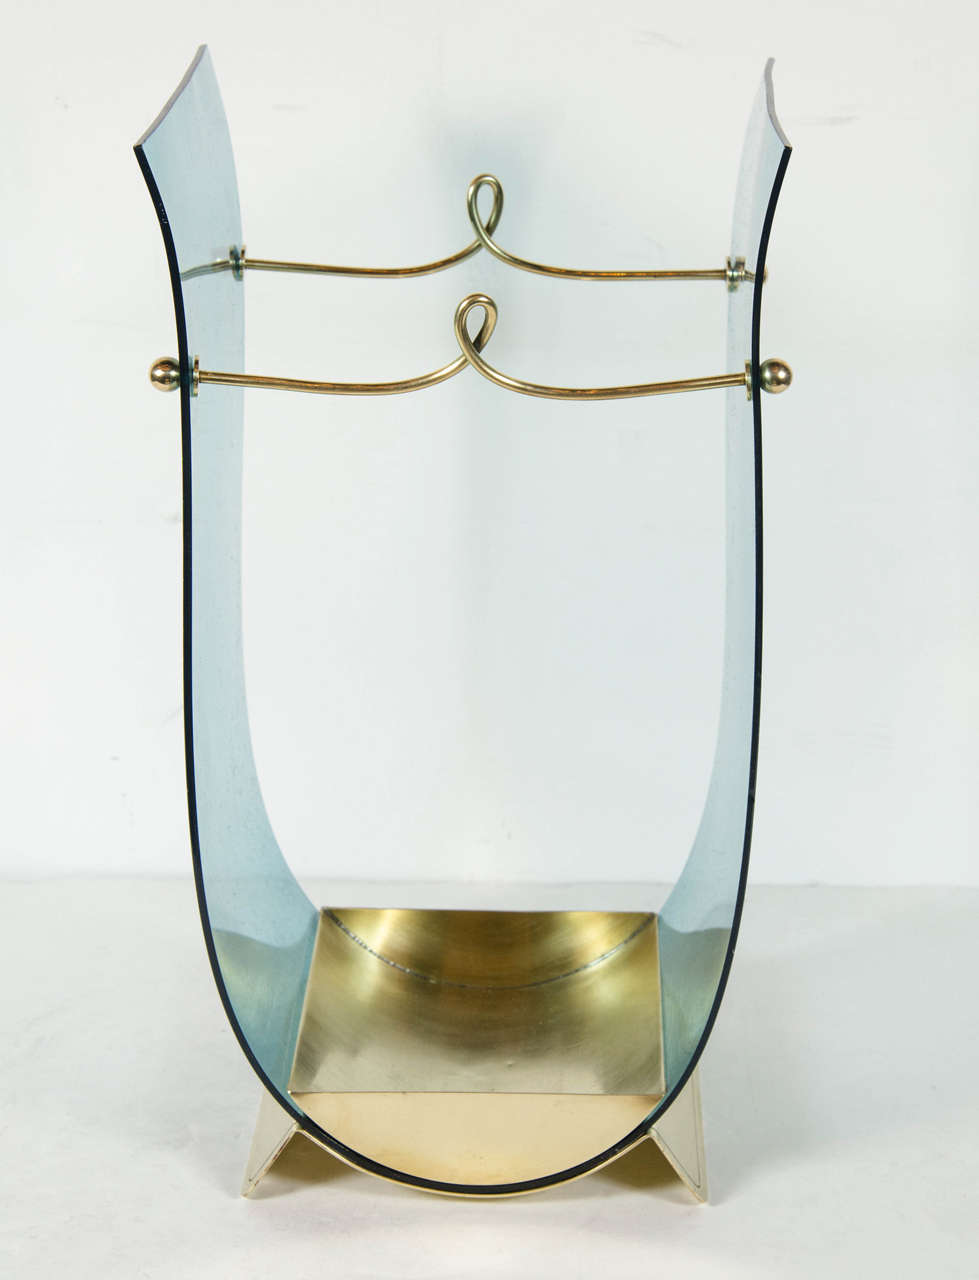 This gorgeous Mid-Century Modernist umbrella stand in the manner of Adnet features a pane of turquoise lucite suspended in a U-form by two sculptural brass fittings which also serve the purpose of containing umbrellas. It has a brass receptacle